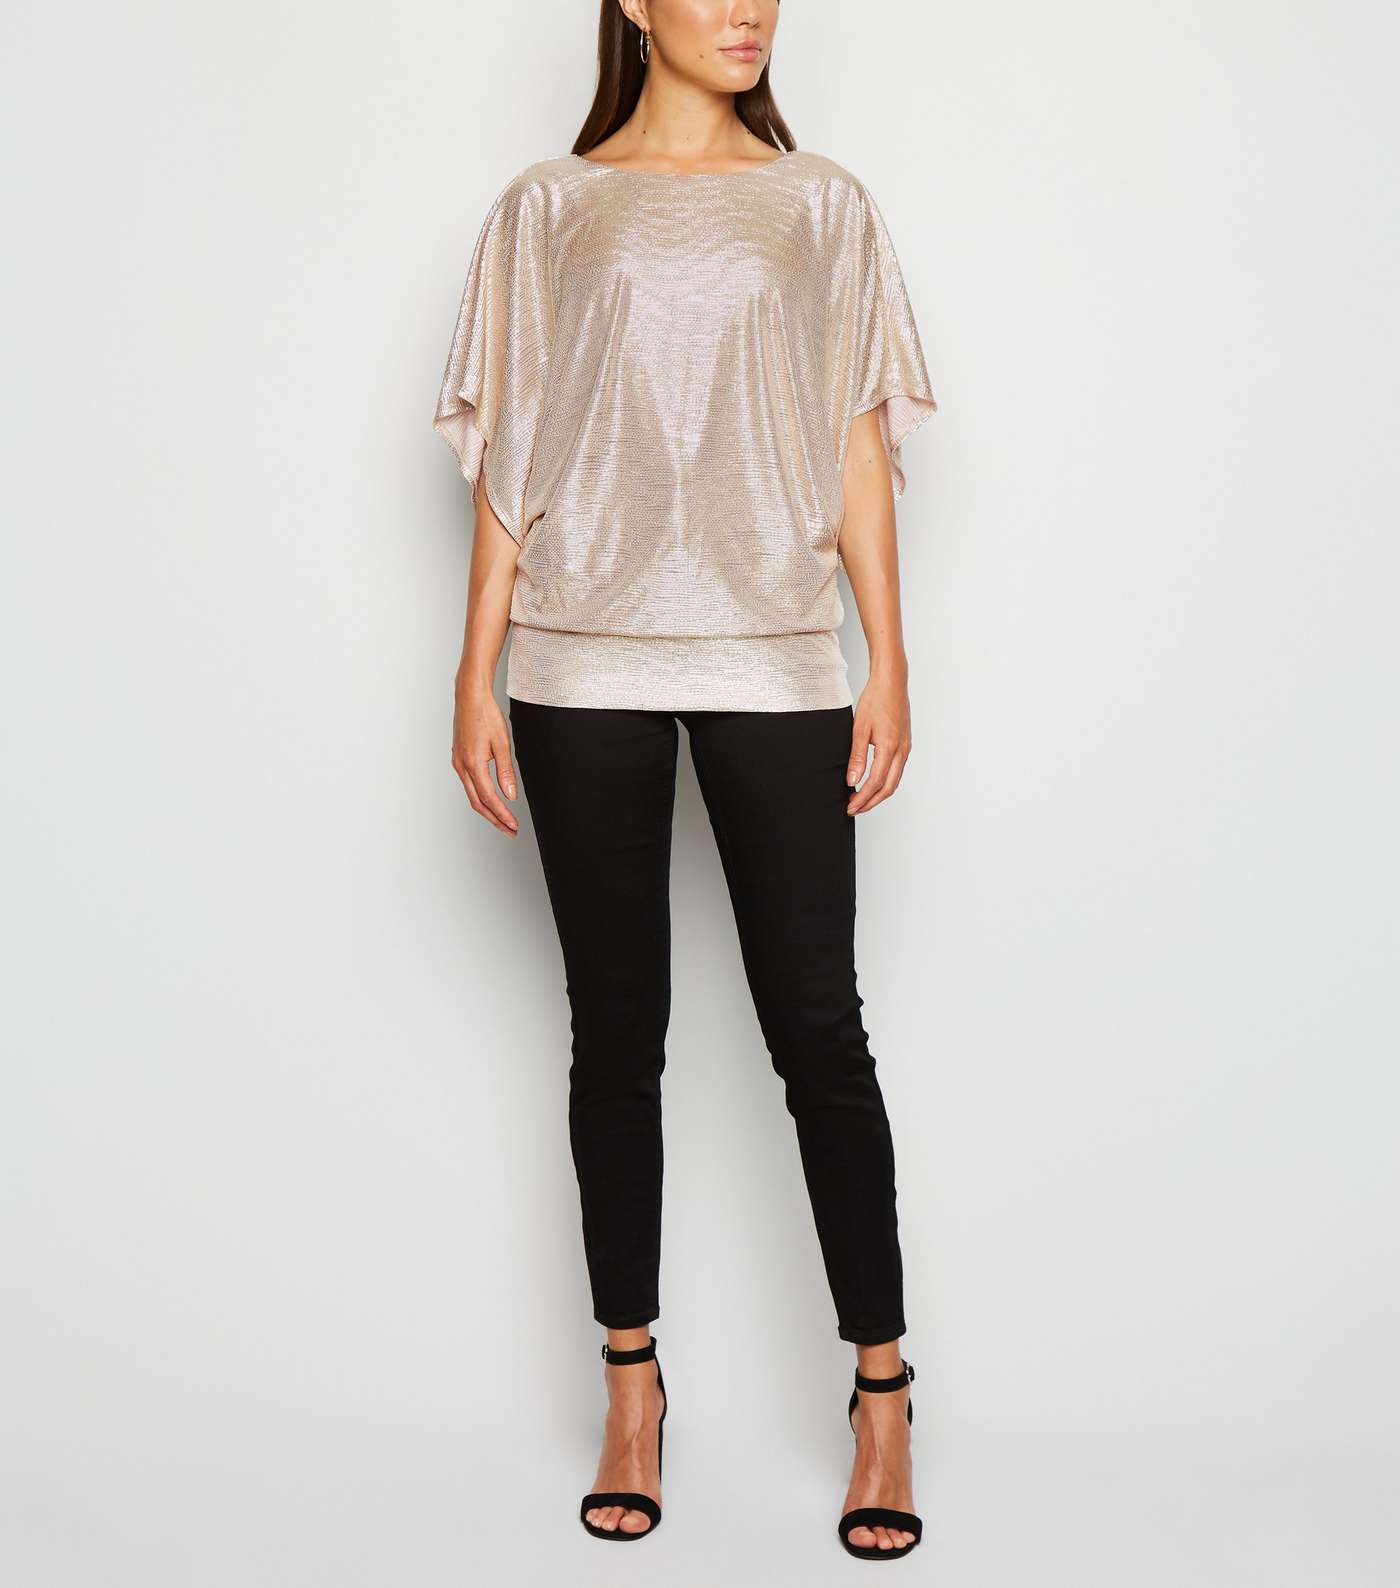 Gold Shimmer Batwing Sleeve Top Image 2